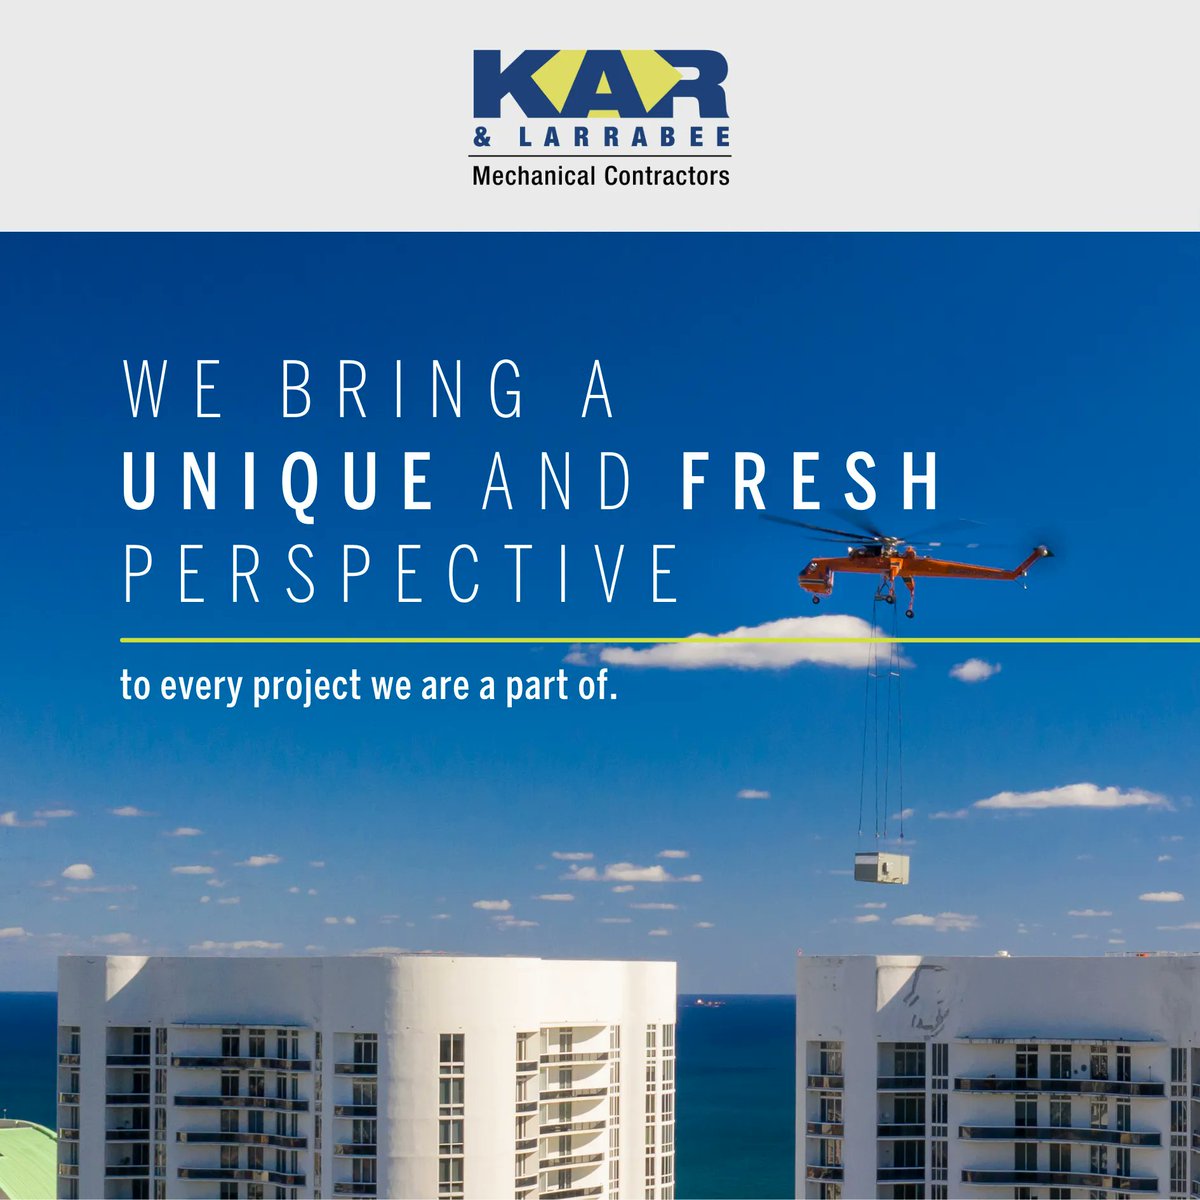 KAR & Larrabee brings a unique and fresh perspective to every project which has allowed us to become a trusted and valued partner to companies and corporations throughout Florida.

Learn more about us at buff.ly/3Kdr8ql 

#KARLarrabee #mechanicalcontractors